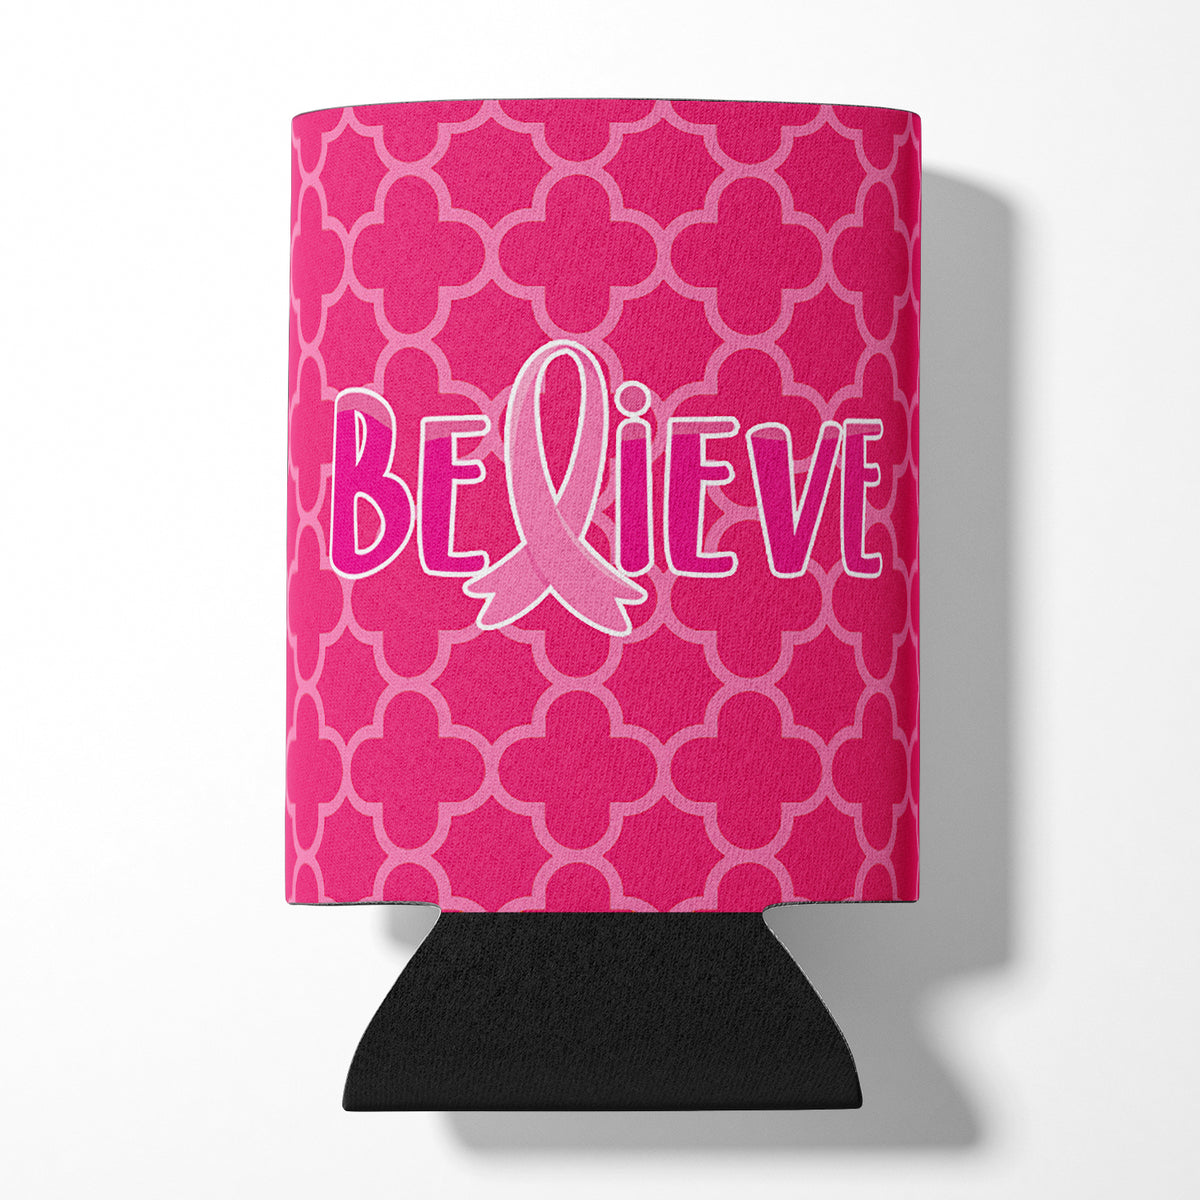 Breast Cancer Awareness Ribbon Believe Can or Bottle Hugger BB6980CC  the-store.com.